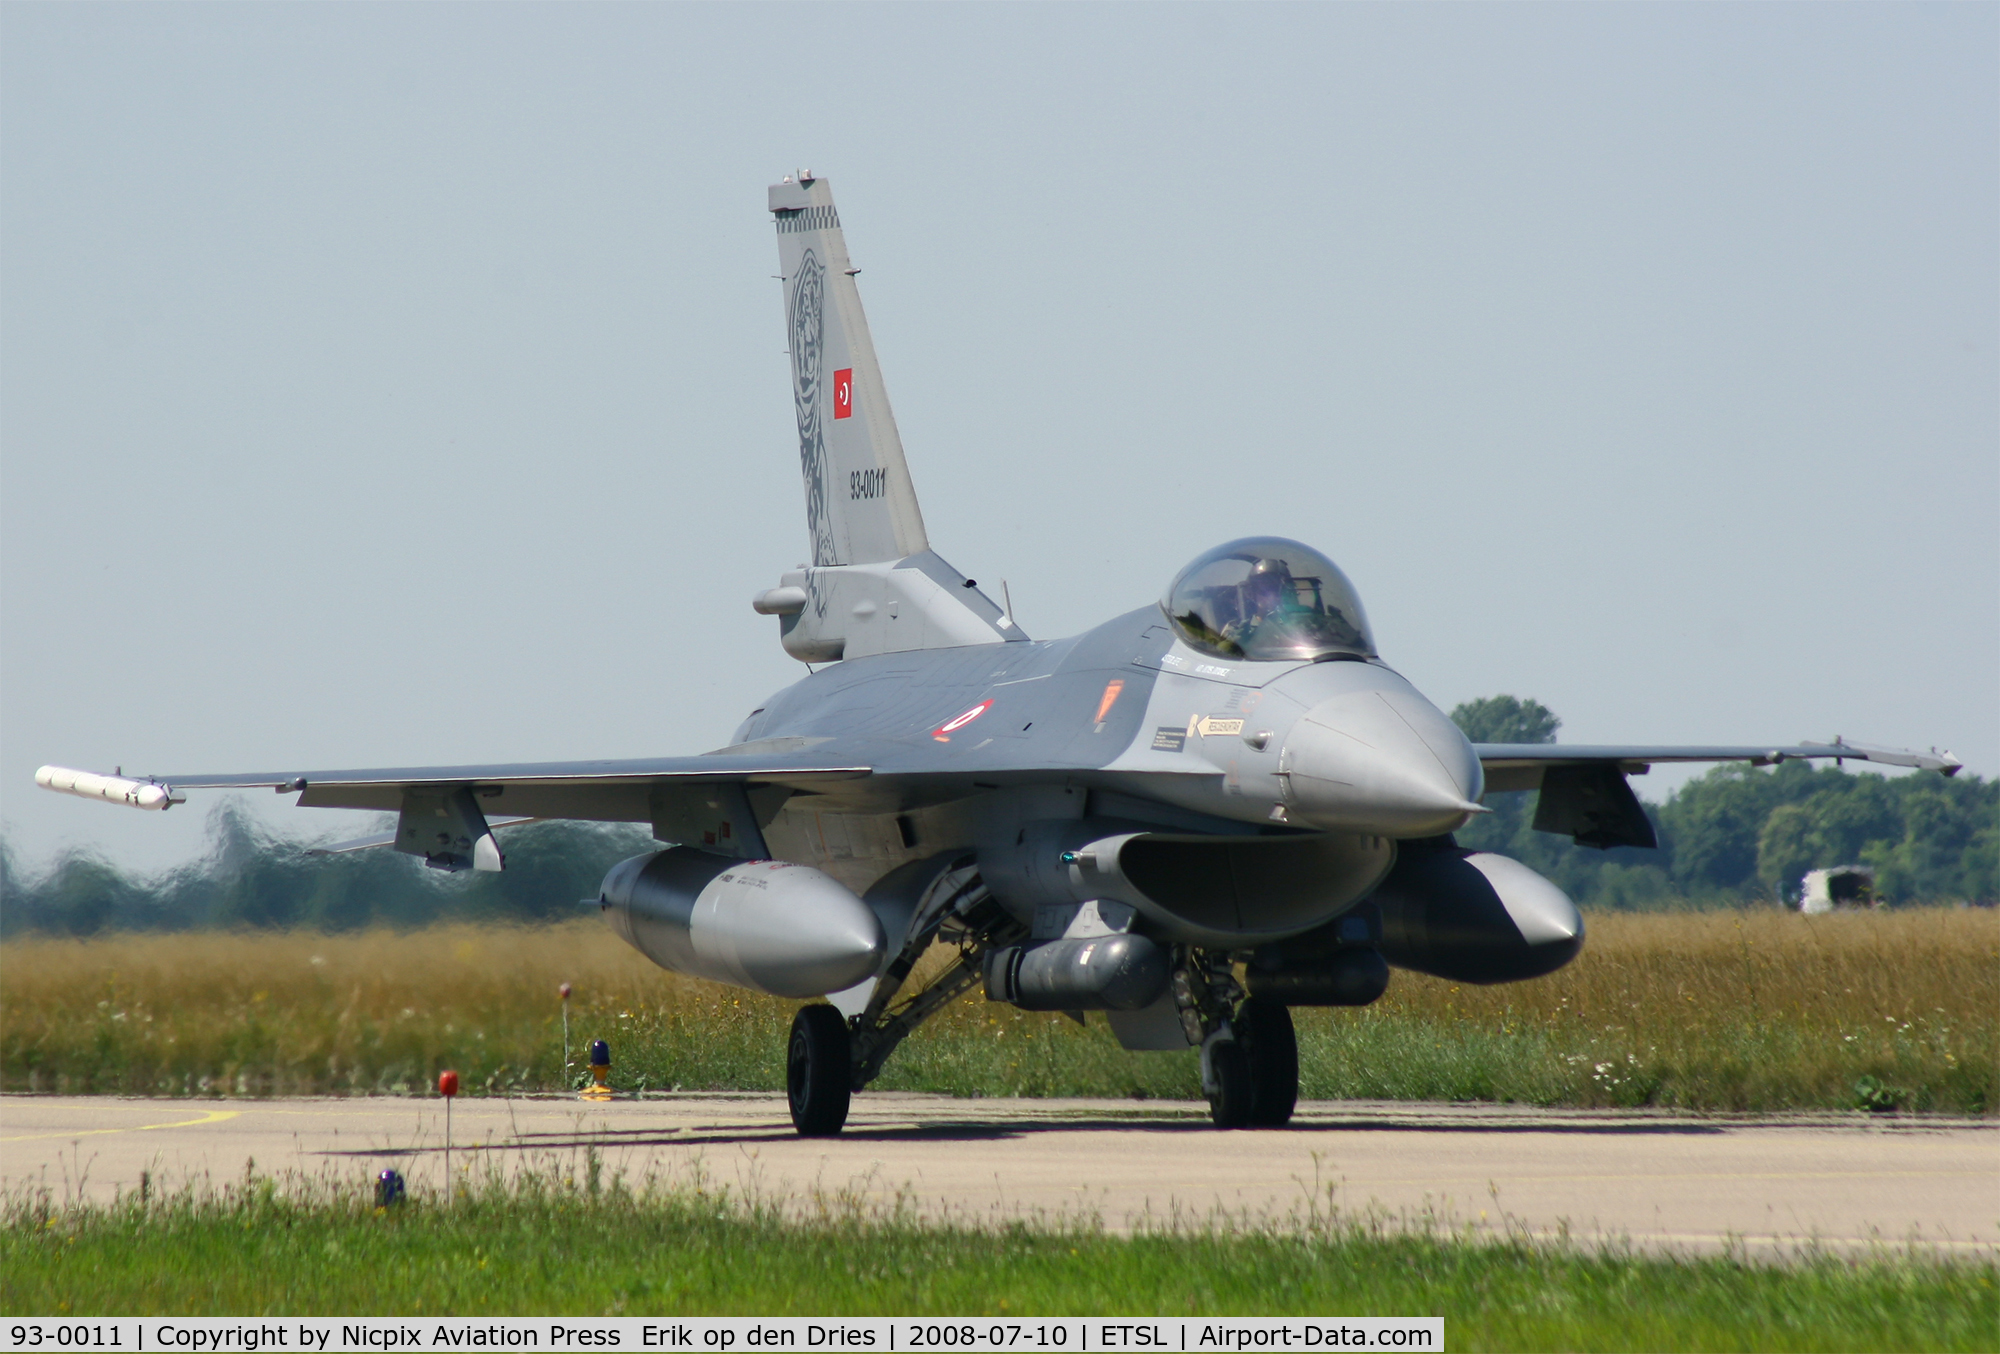 93-0011, Lockheed F-16C Fighting Falcon C/N 4R-133, Turkey participated in the exercise ELITE-2008 at Lechfeld AB, Germany, besides F-4's with F-16's. 93-0011 is seen here on the taxitrack.